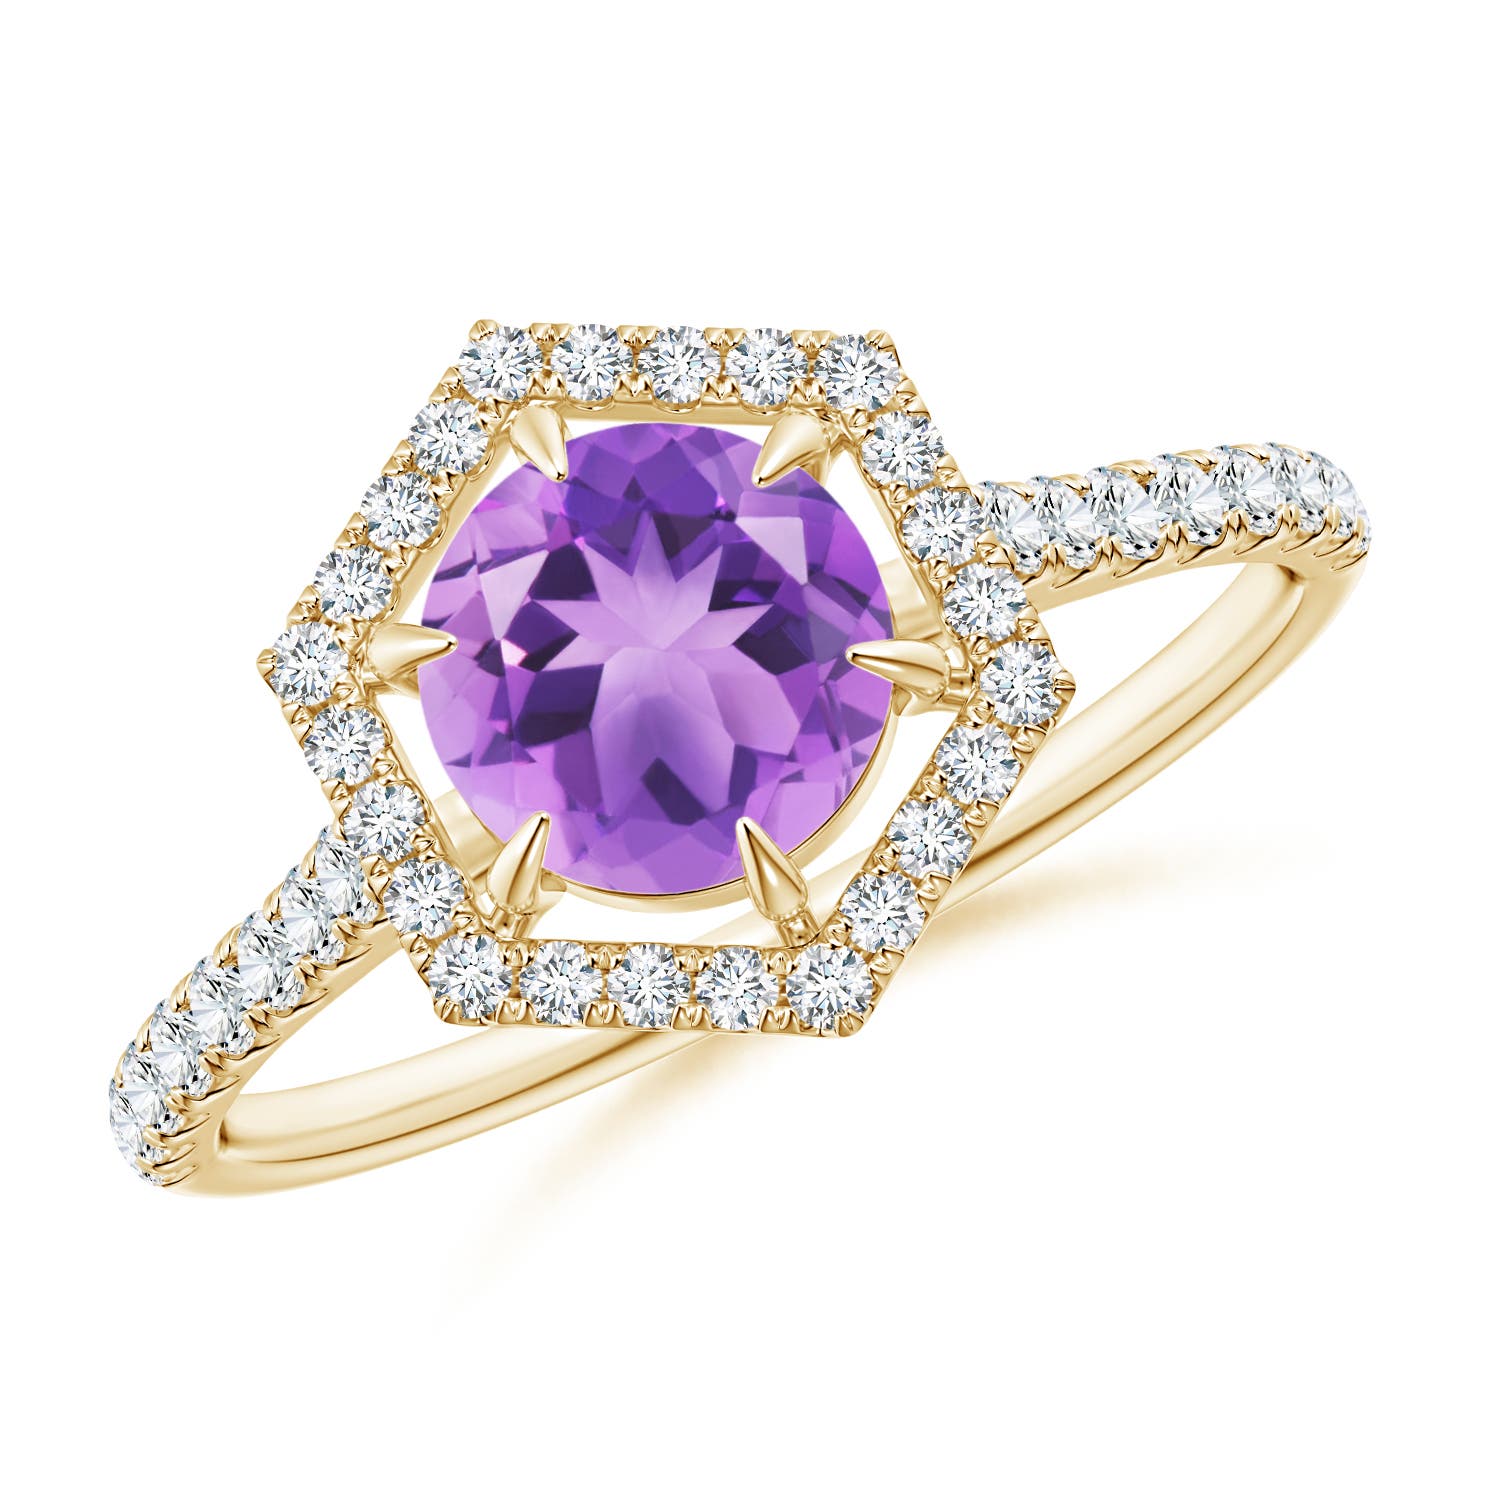 A - Amethyst / 1.14 CT / 14 KT Yellow Gold